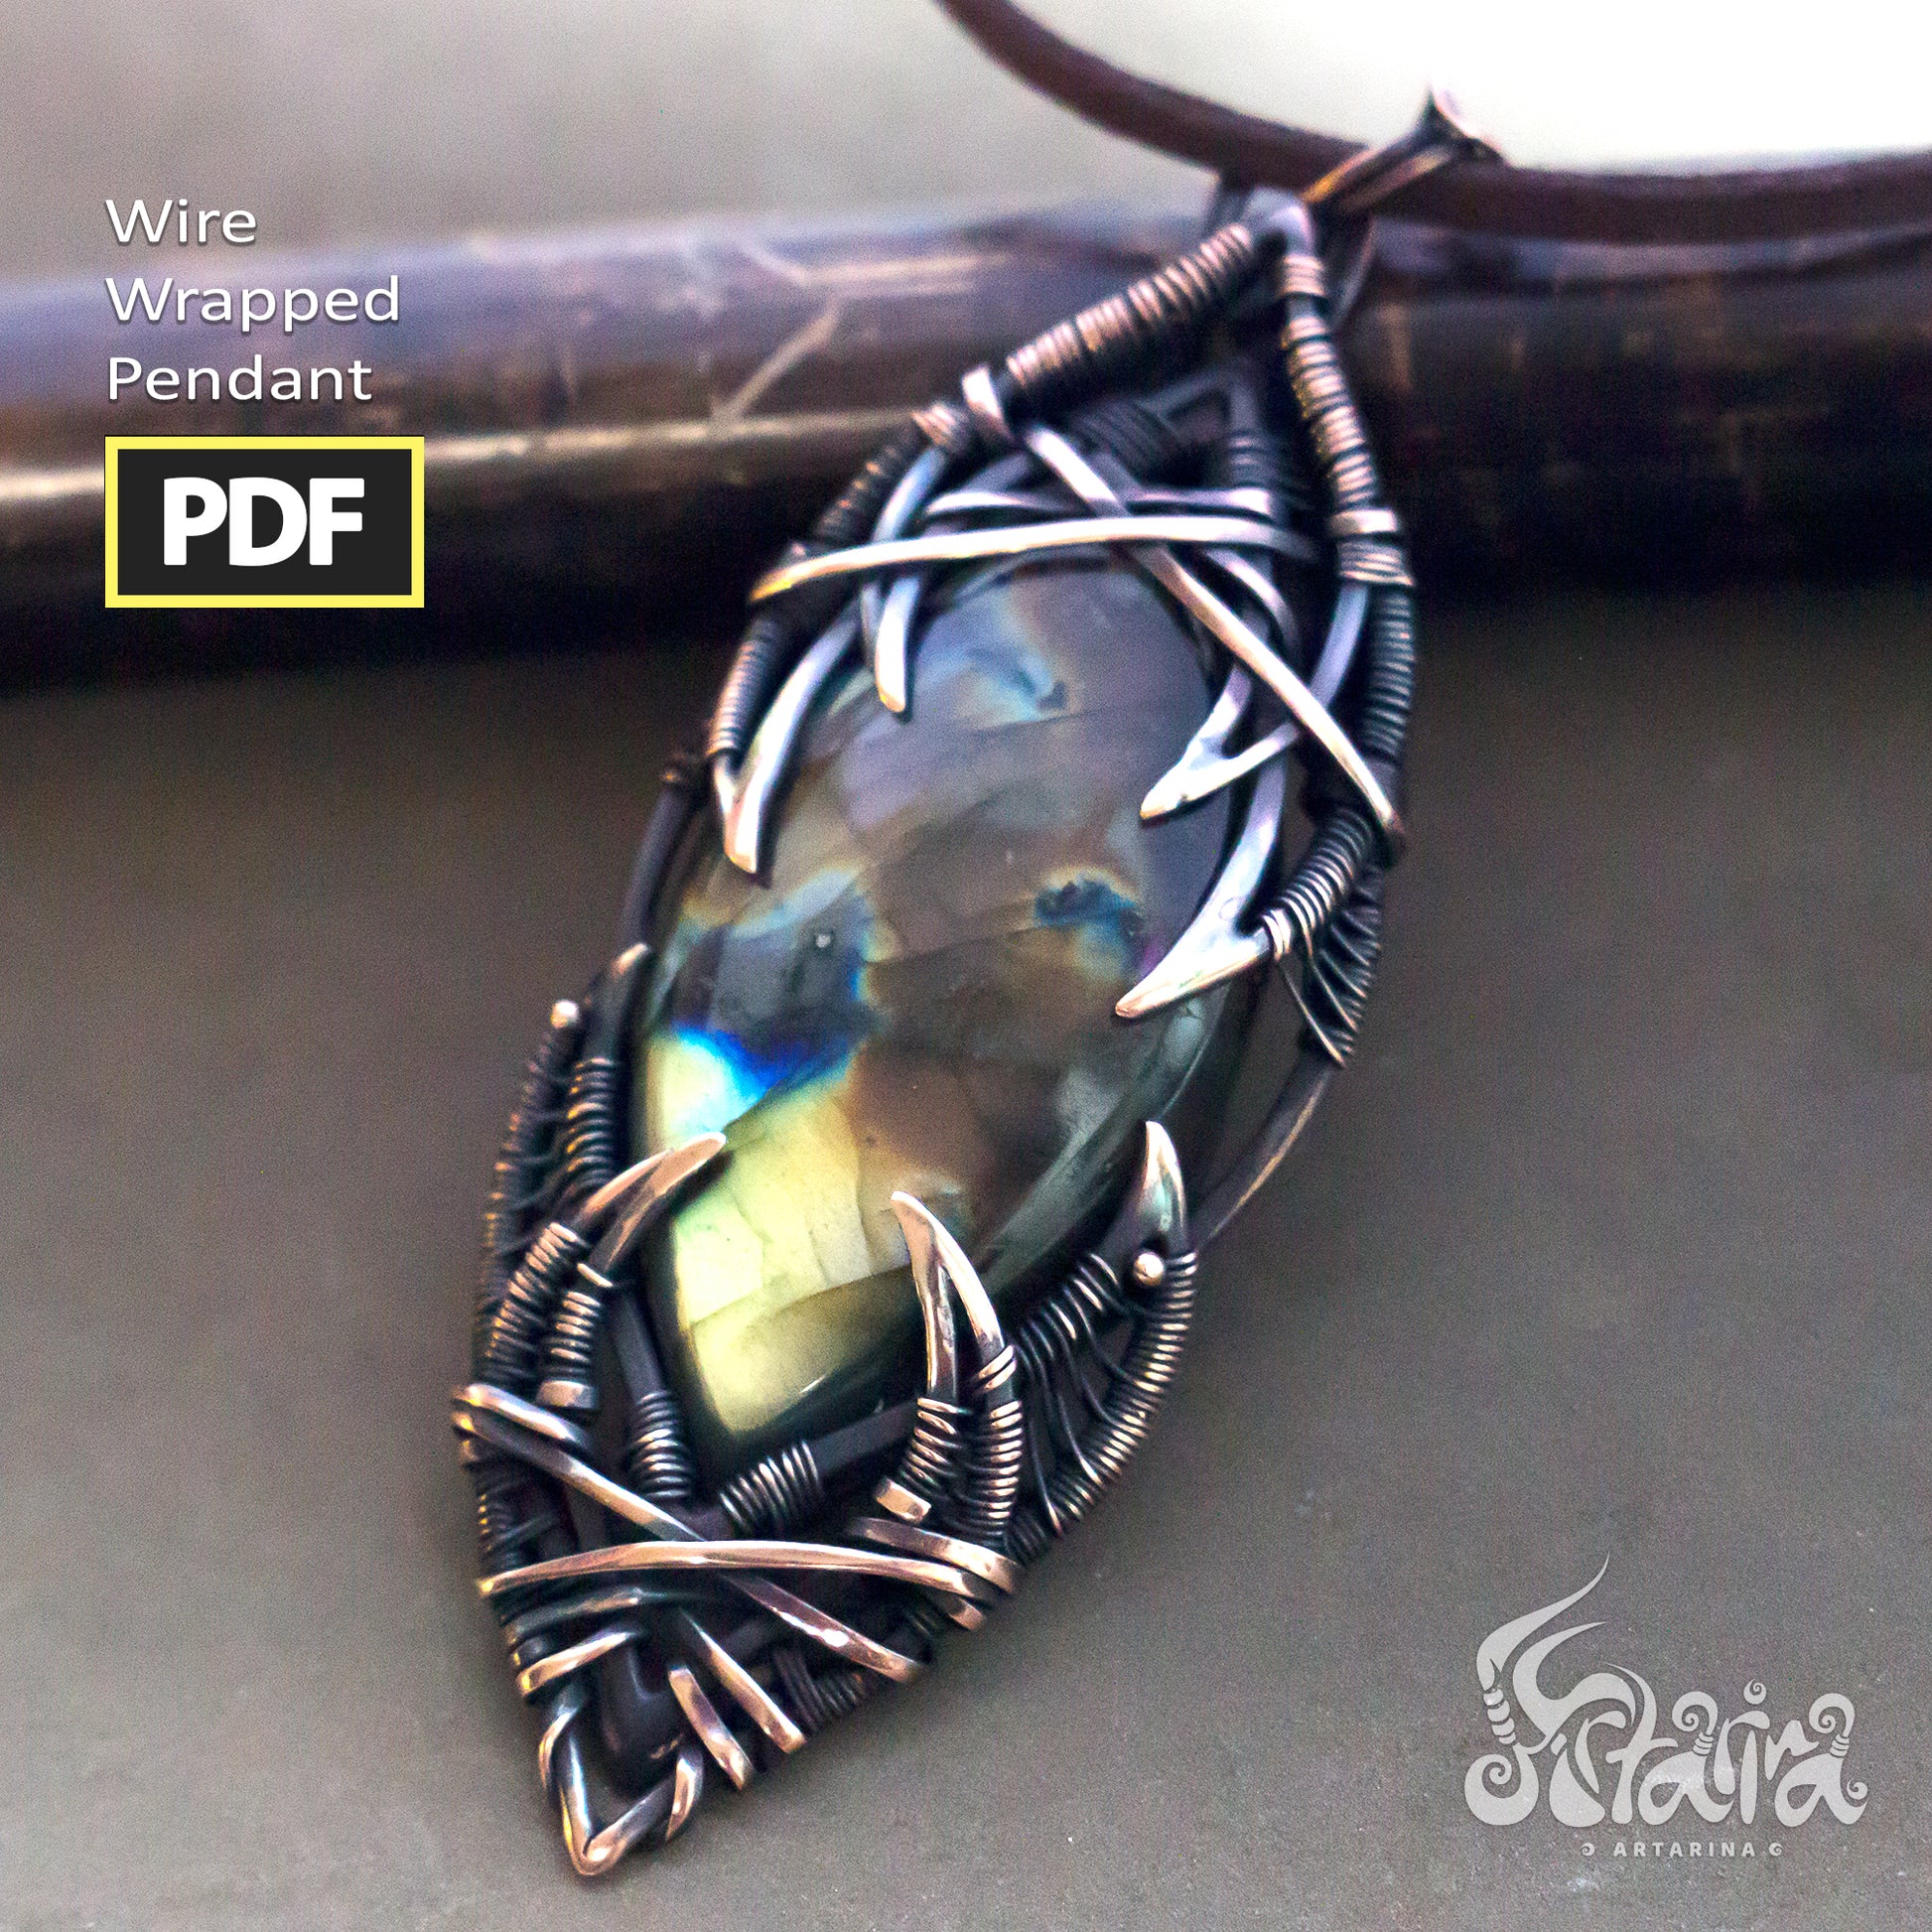 Wire wrapping PDF tutorial | Advanced diy wire jewelry | Complicated copper jewelry step by step solder and wrapping